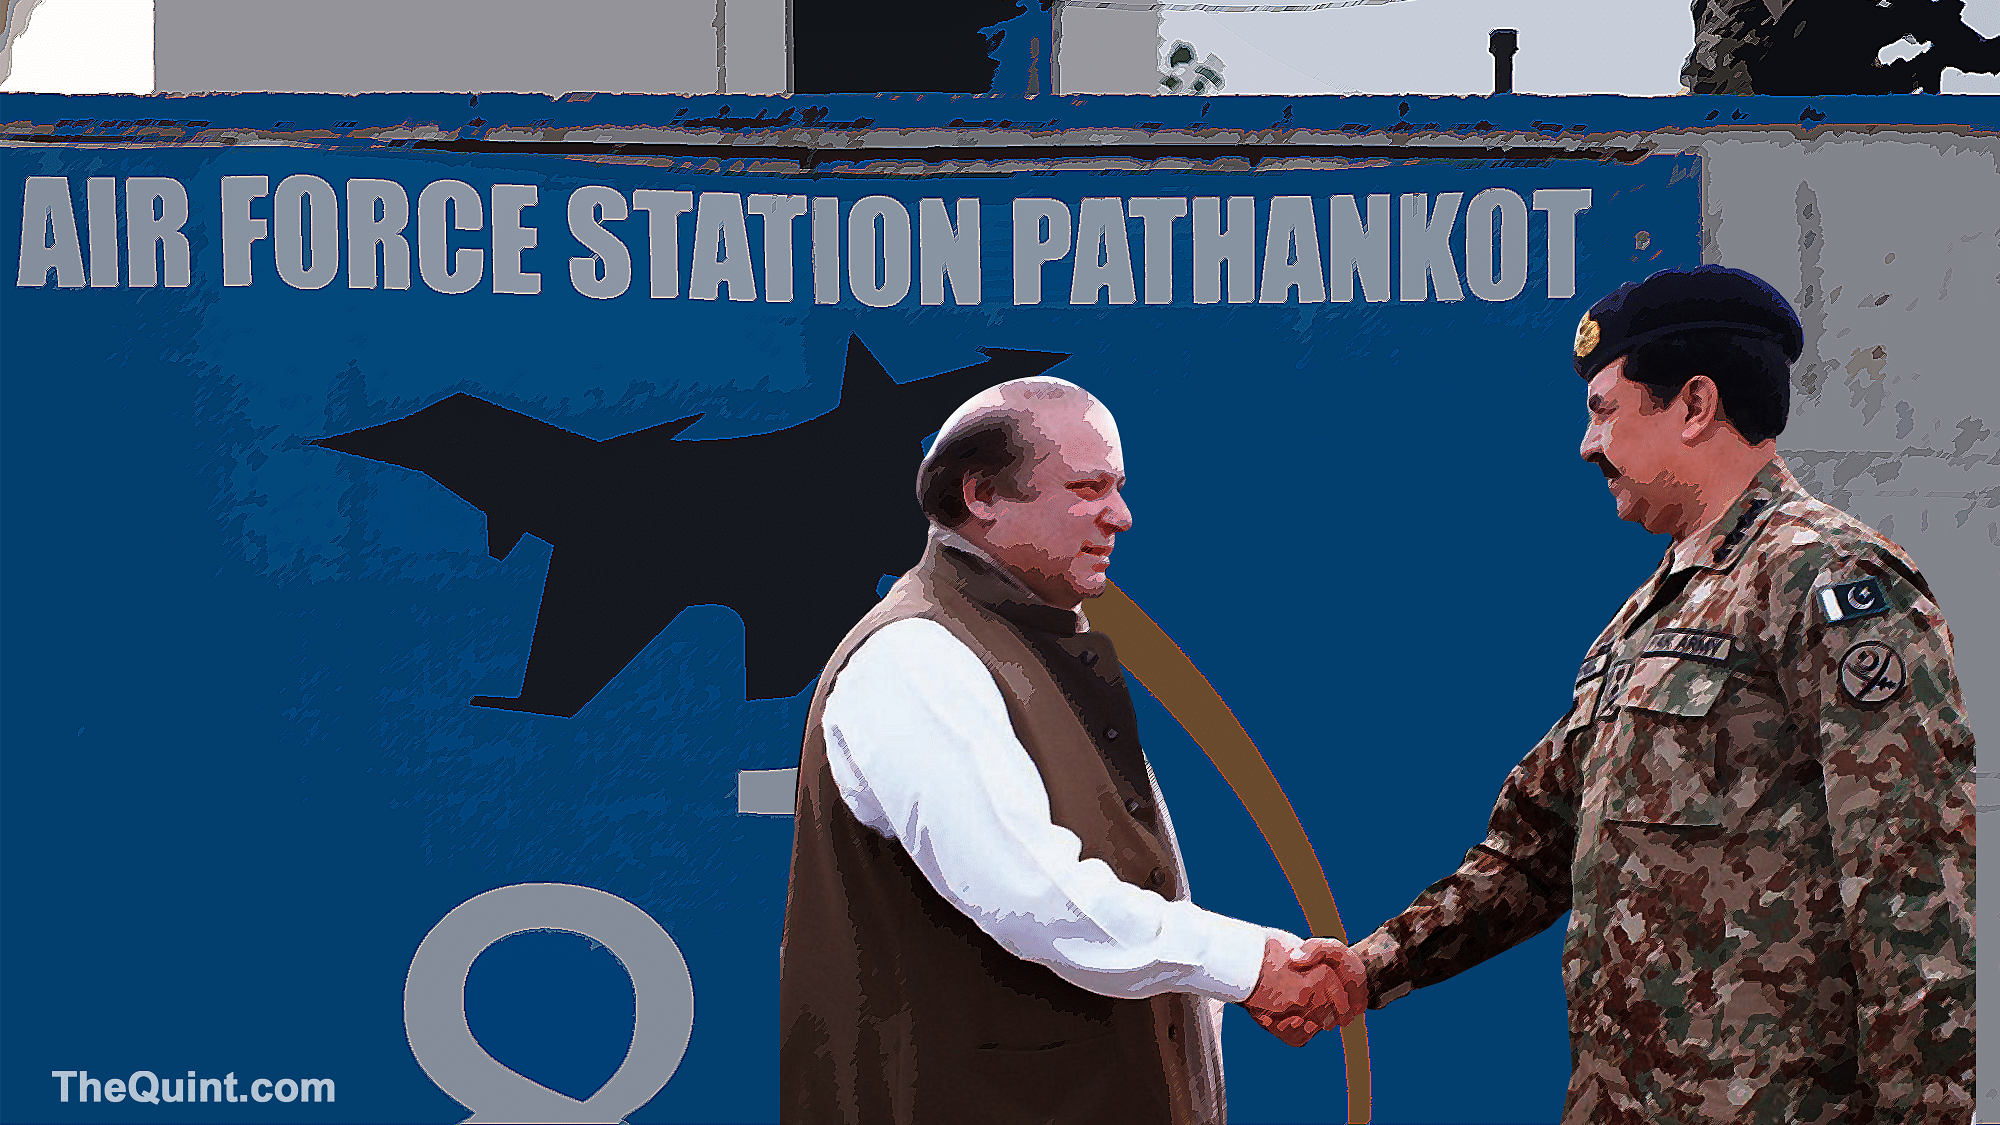 The terrorist attack on Pathankot air force base has actually saved Pakistan Prime Minister Nawaz Sharif and his army chief, General Raheel Sharif from a huge crisis. (Photo: The Quint)